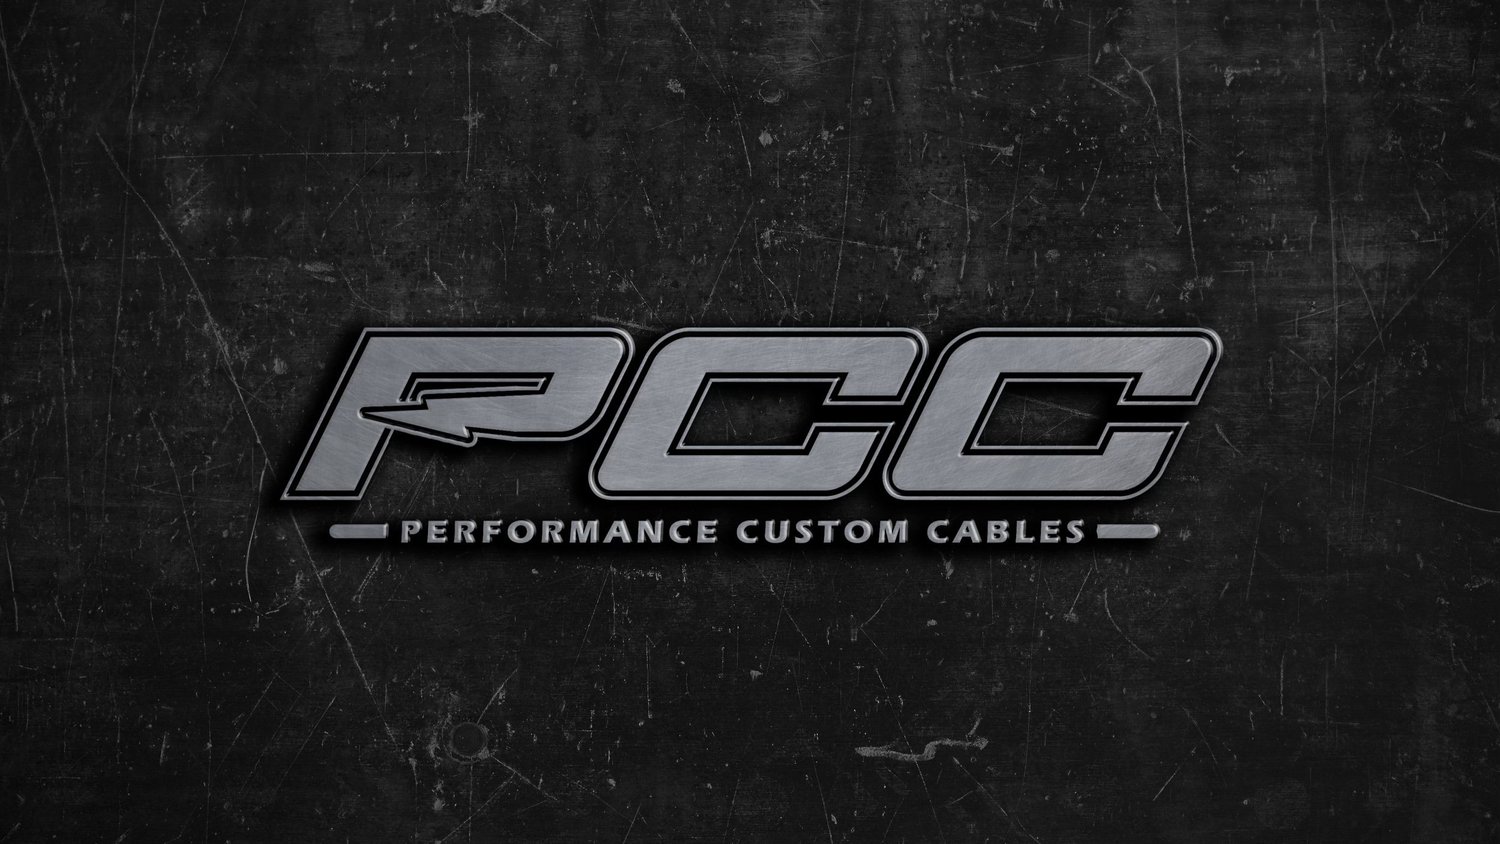 Performance Custom Cables